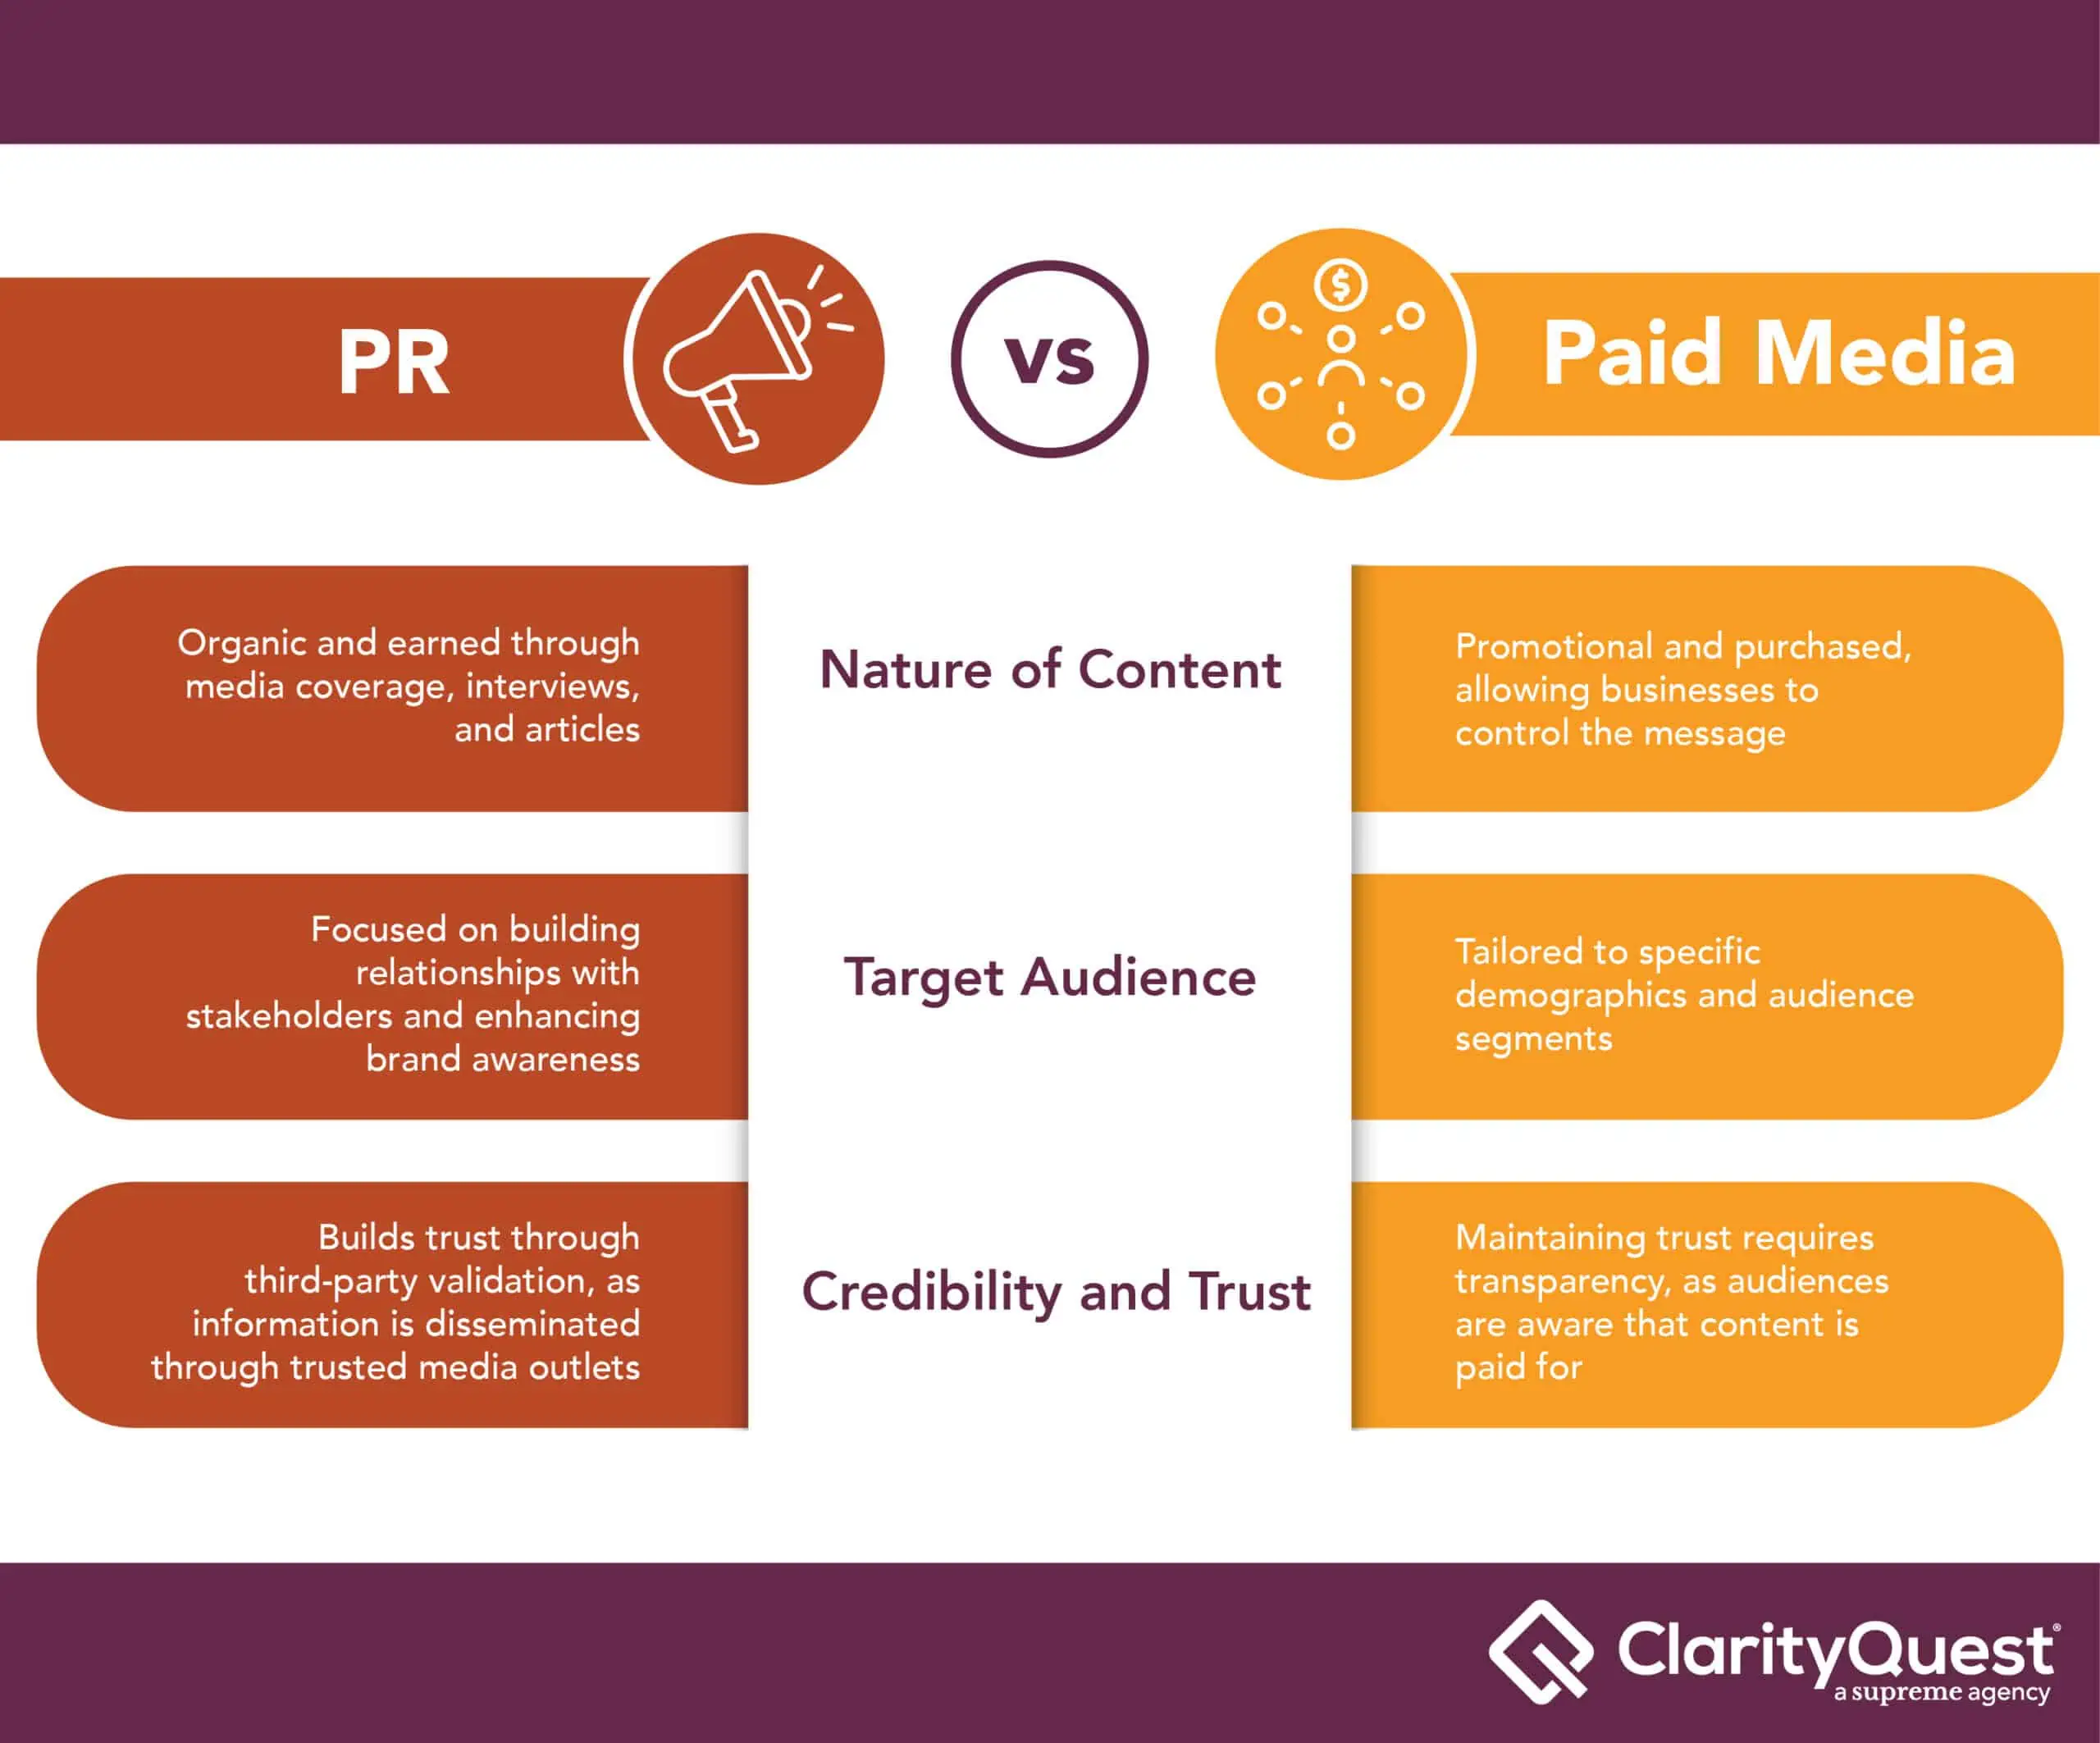 public relations paid media differences